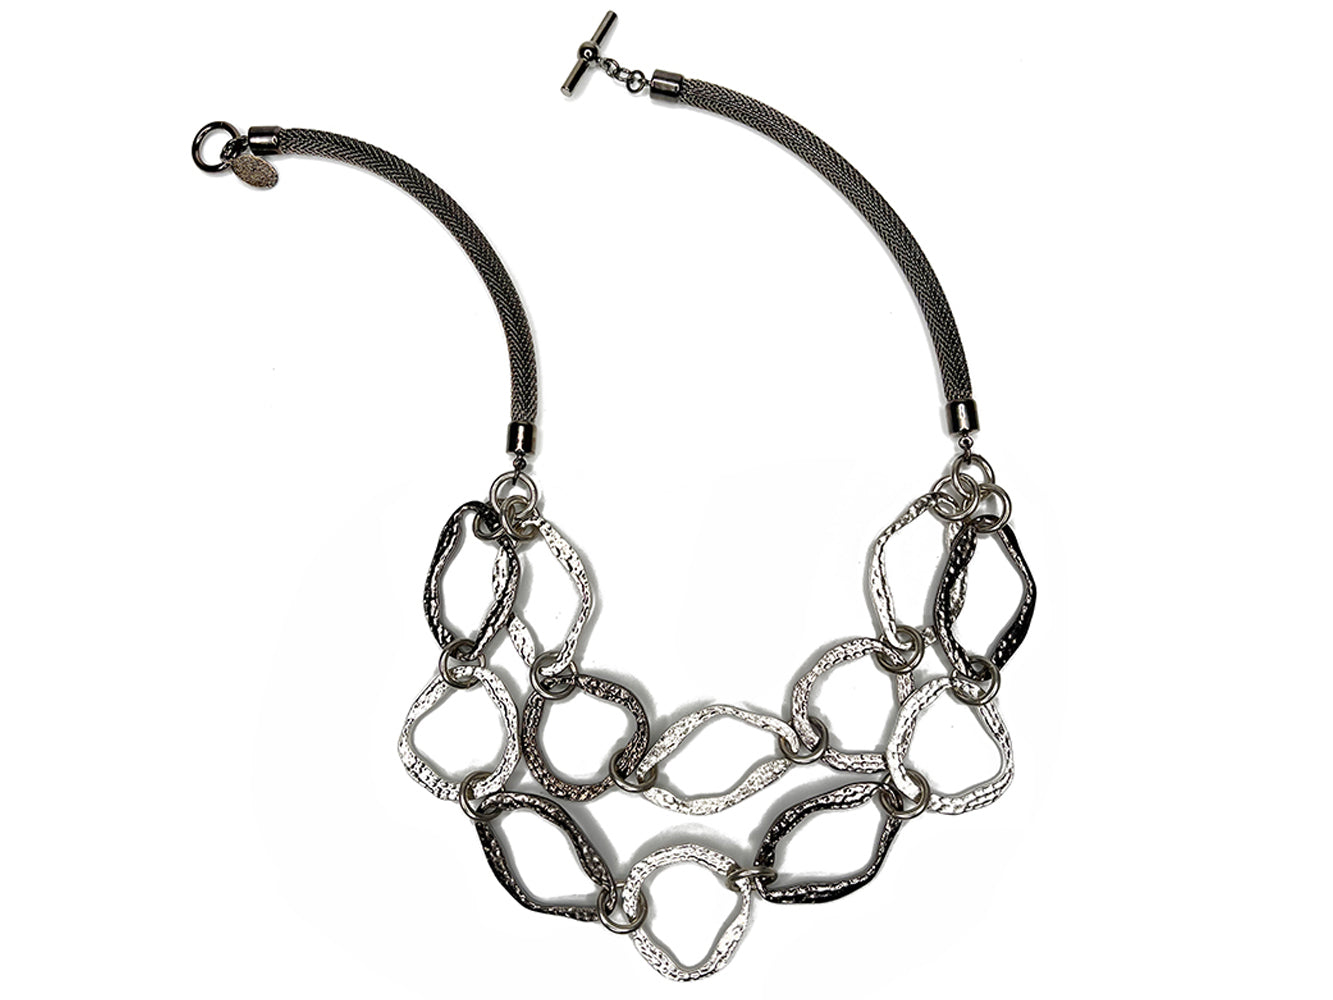 Mesh Necklace with 2-Strands of Hammered Ovals | Erica Zap Designs